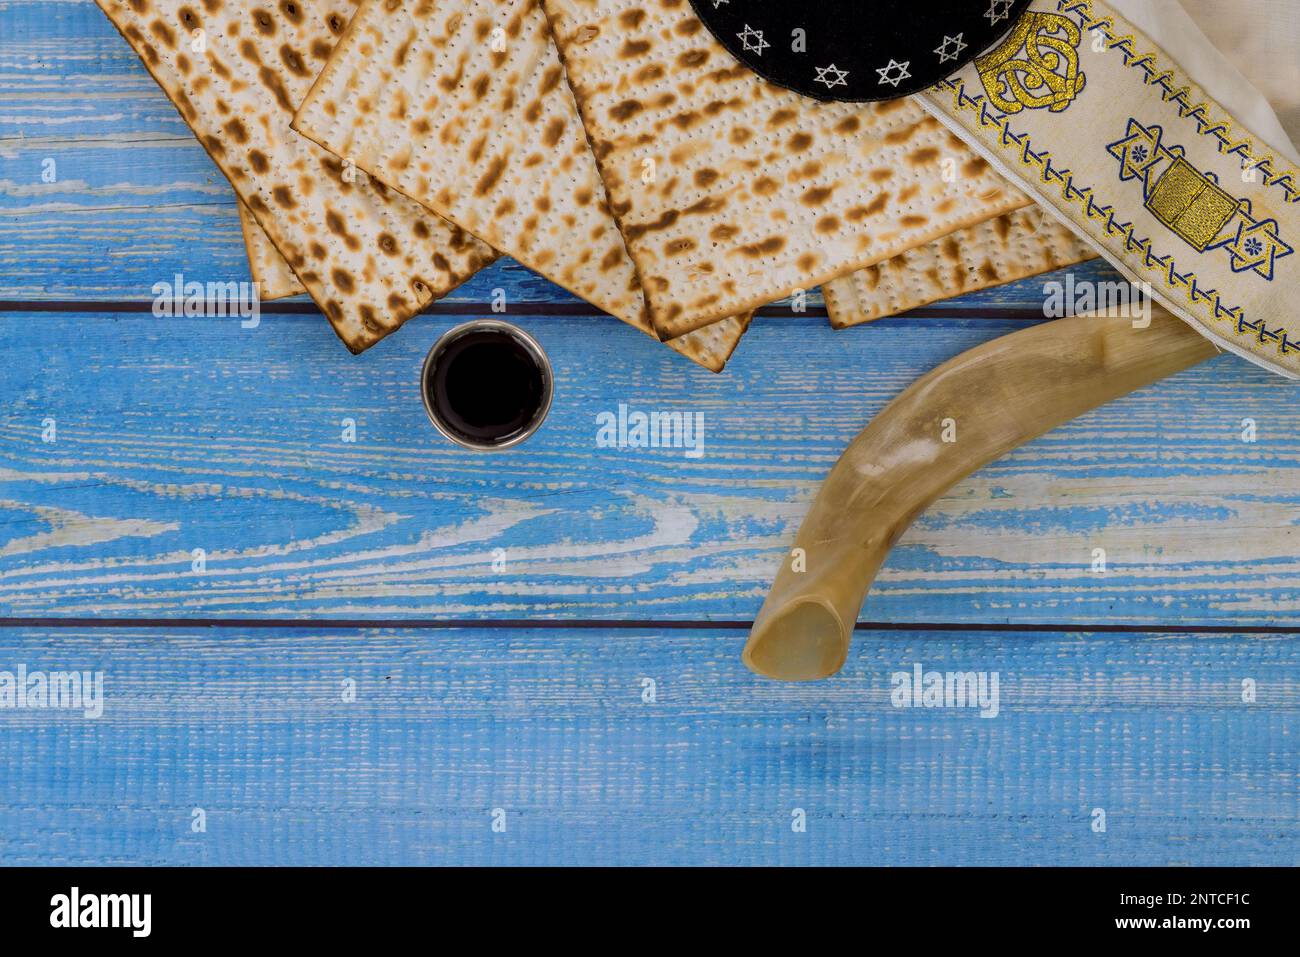 For Pesach unleavened matzah bread is eaten and kosher kiddush cup wine is used to celebrate holiday. Stock Photo